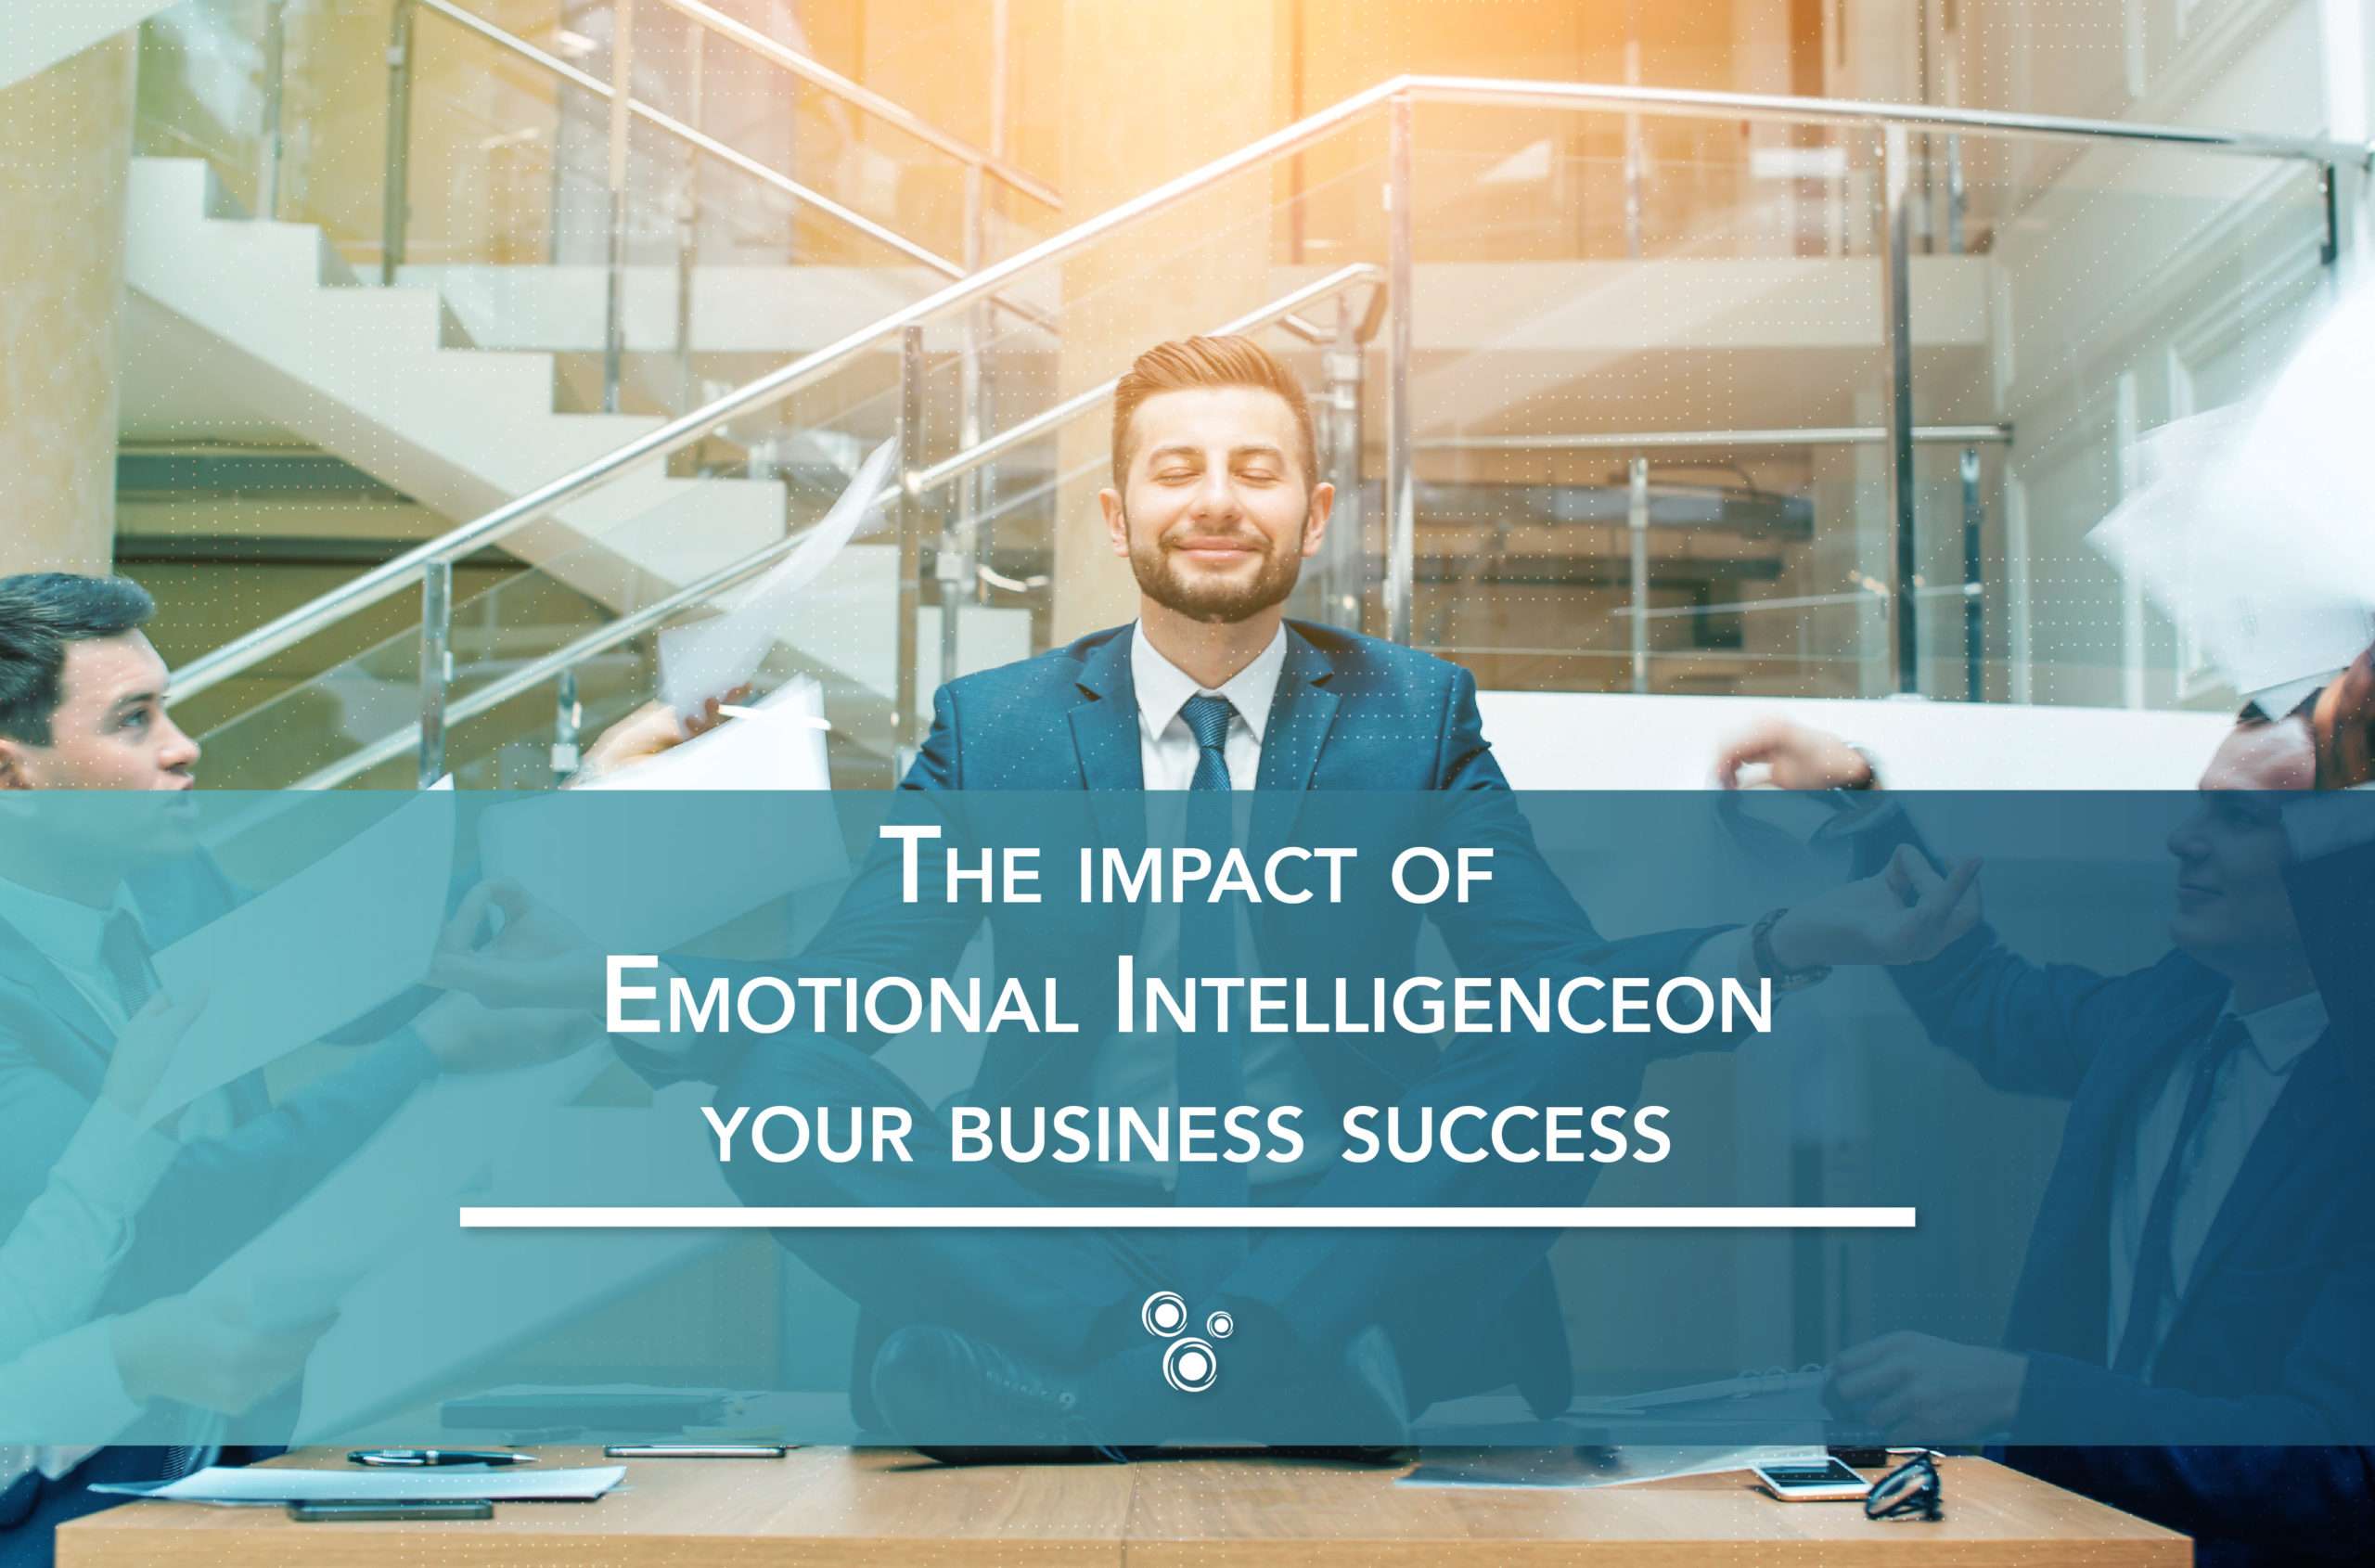 The impact of emotional intelligence on your business success